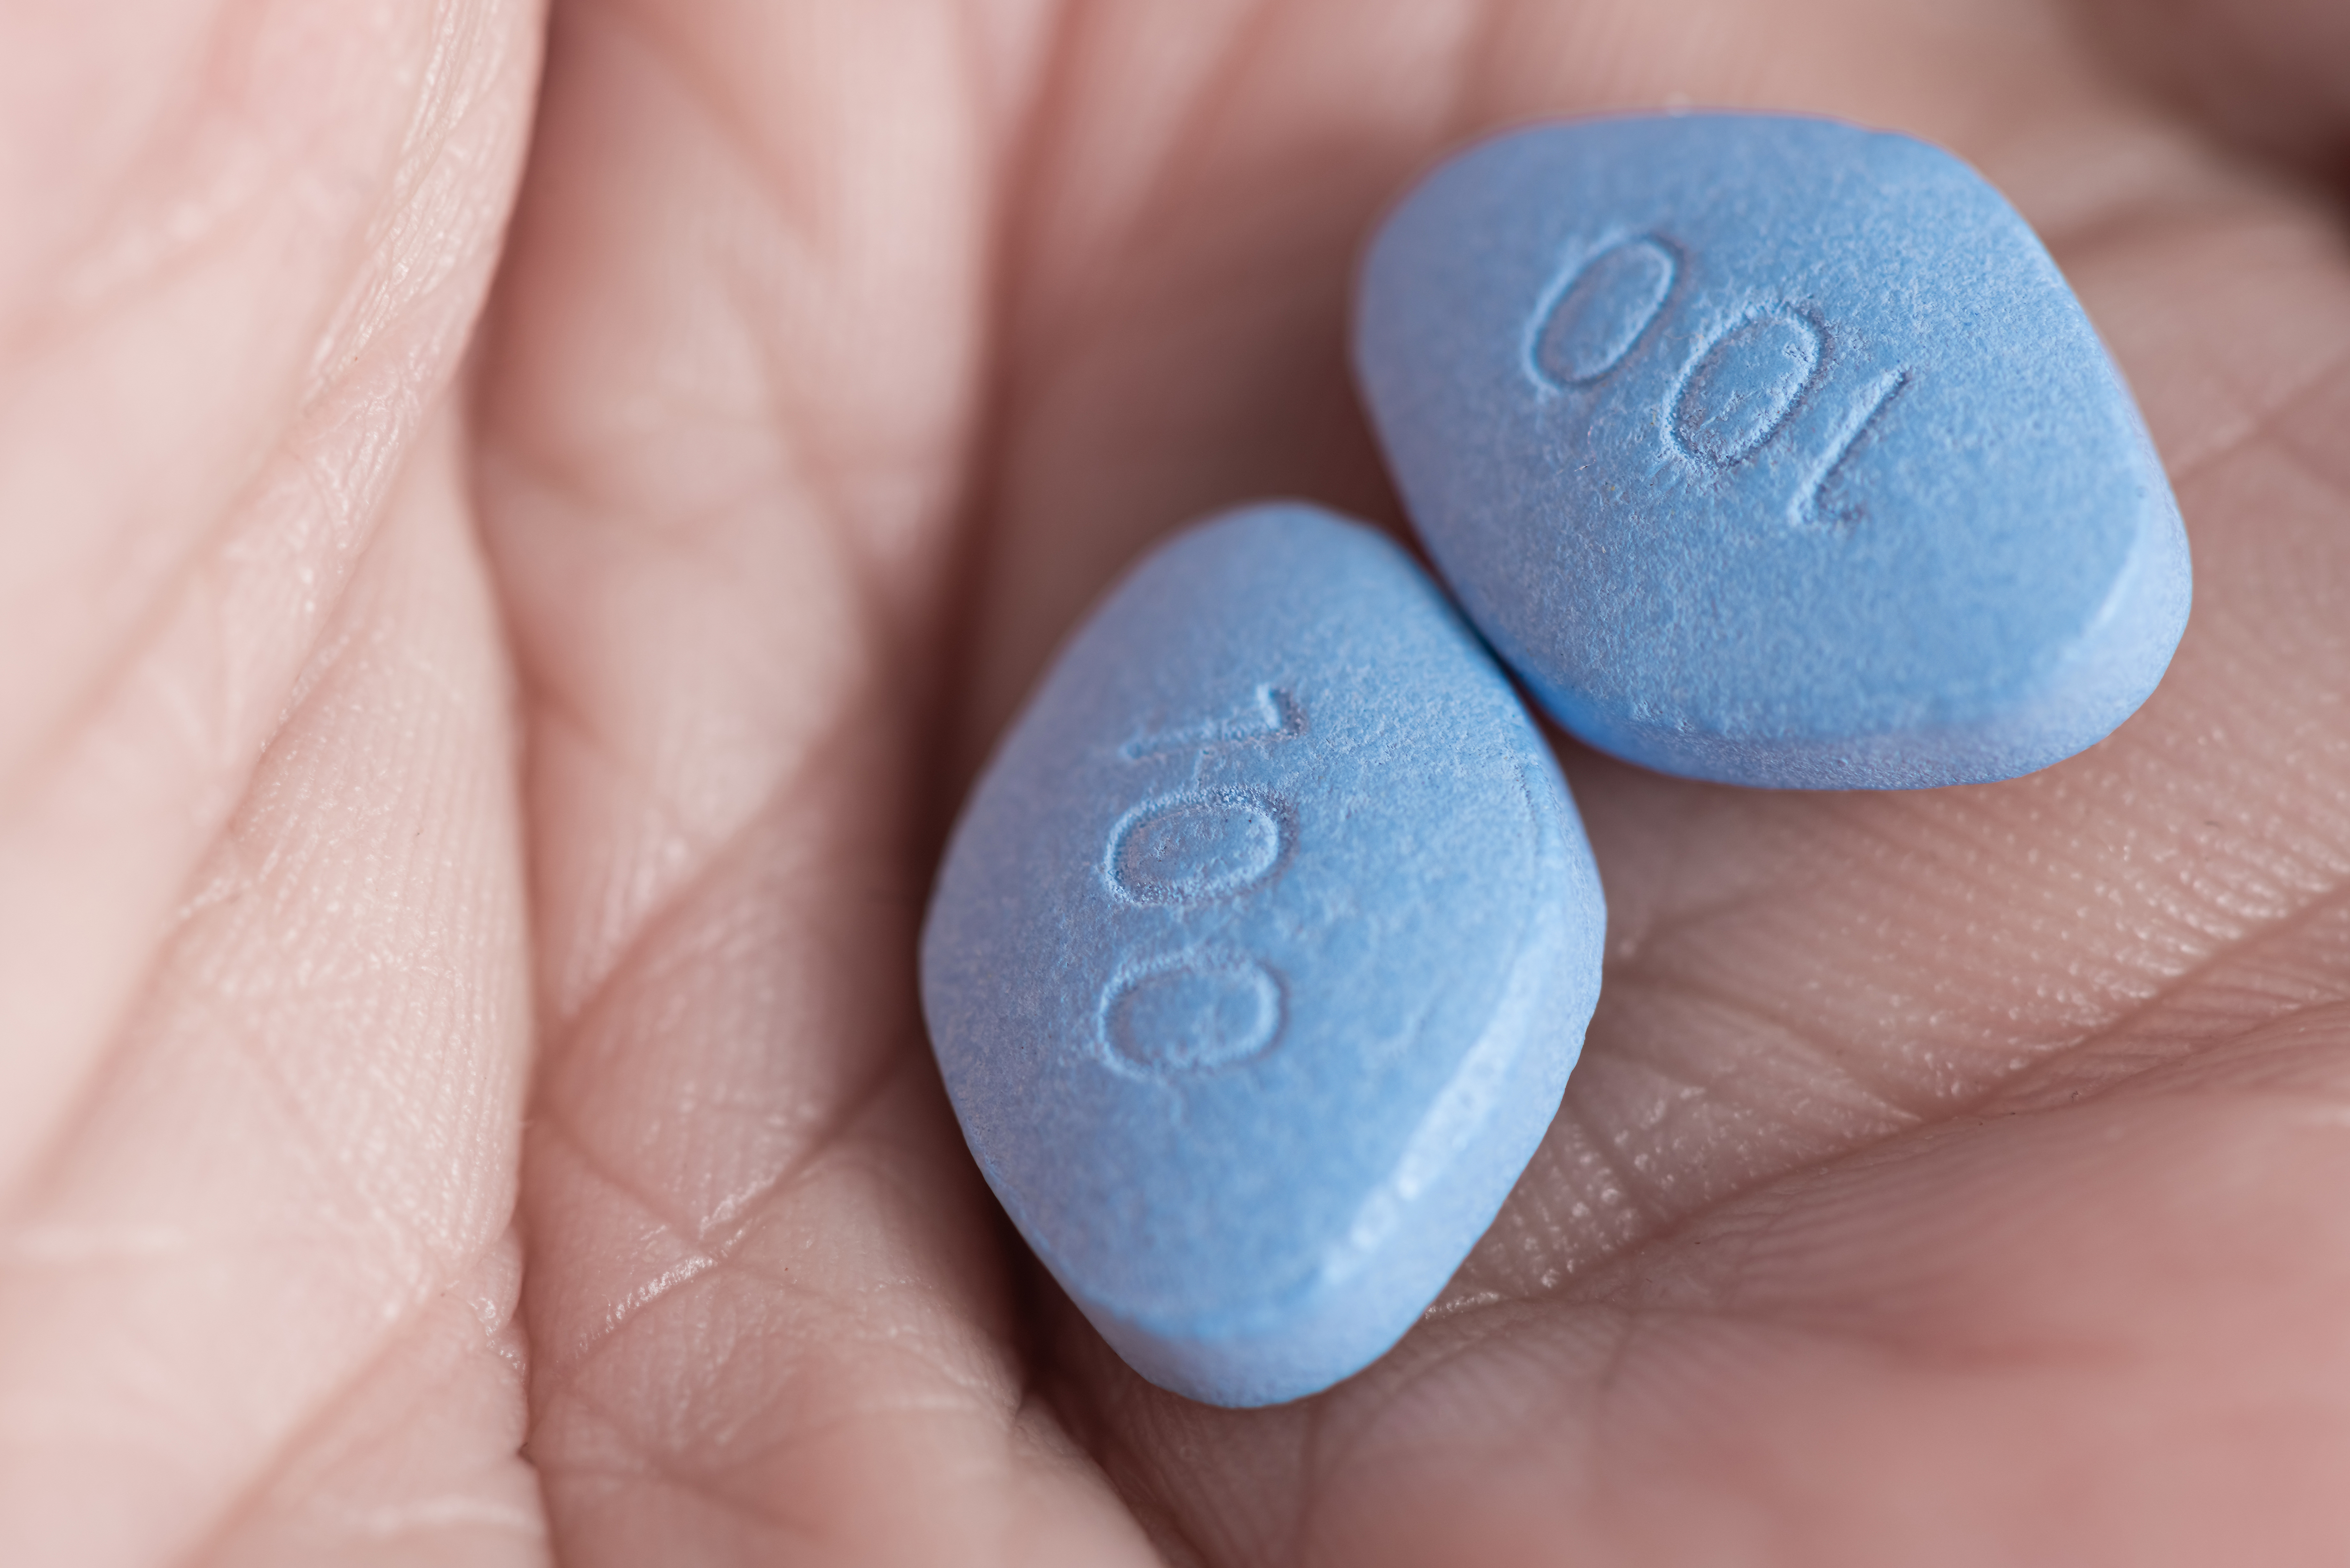 Exact UK location that uses most Viagra - where does your town rank?